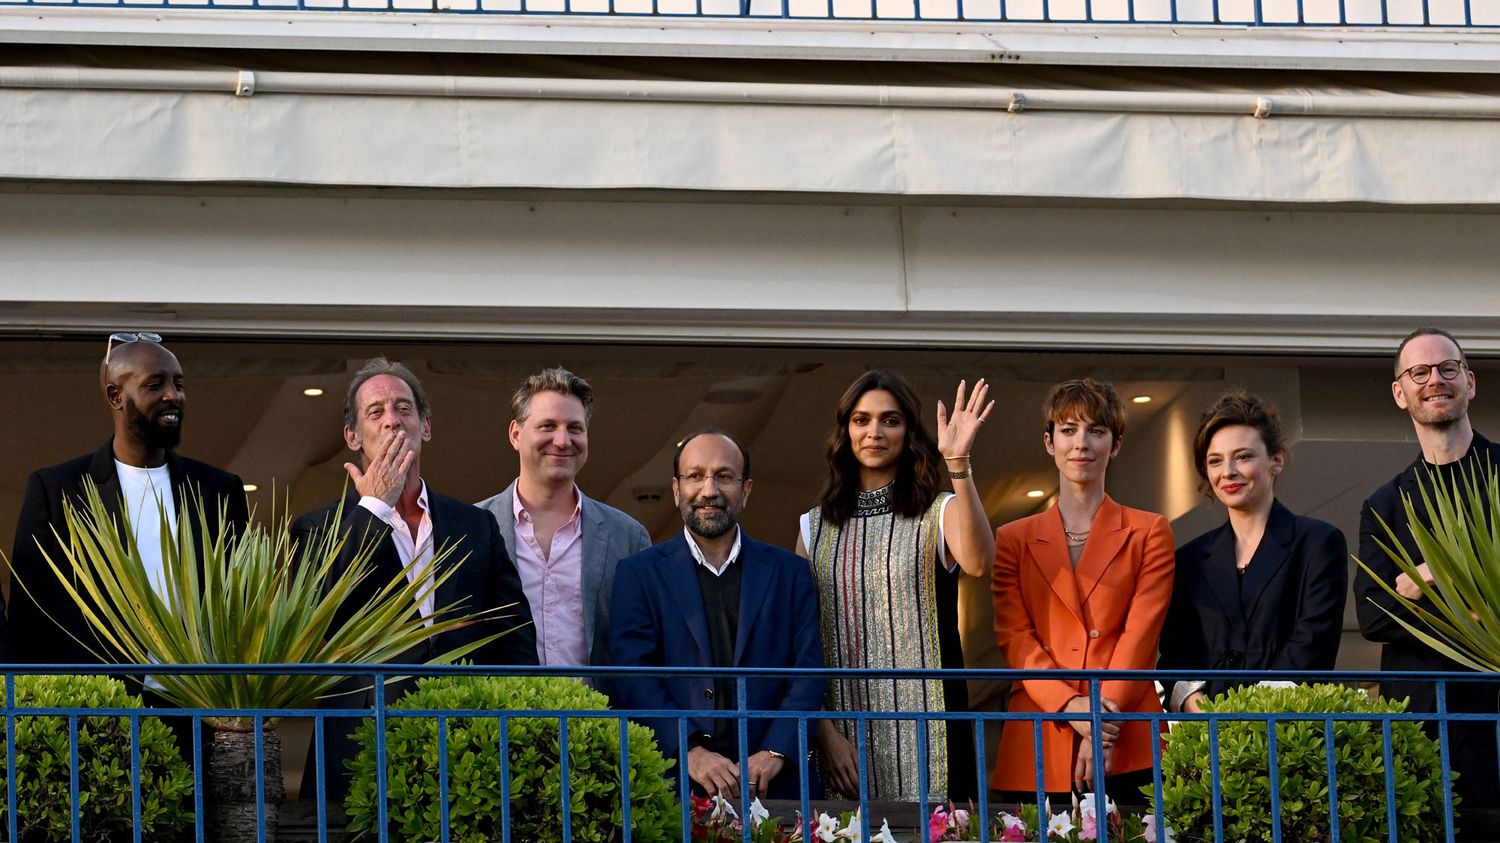 Cannes 2022: from Ladj Ly to Rebecca Hall, eight actresses and directors surround Vincent Lindon, the president of the jury
